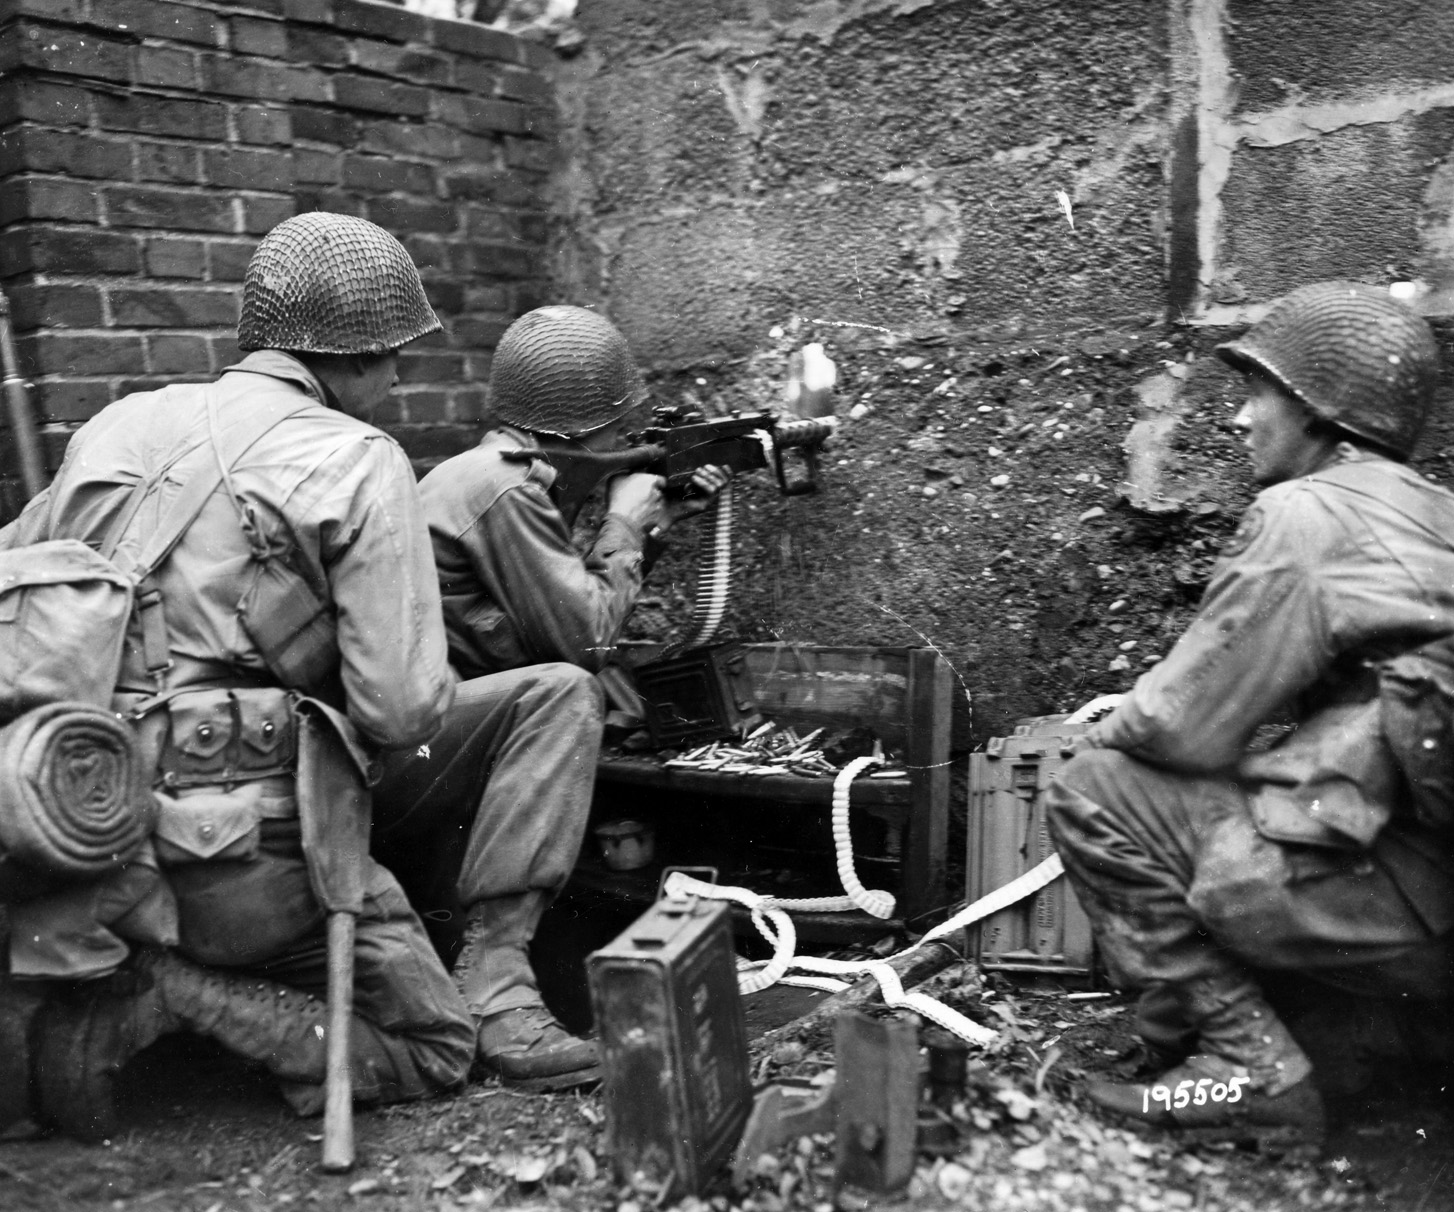 In this photo, taken in the midst of a firefight in Kohlshed, Germany, 3rd Division soldiers fire a machine gun through a hole in a wall at enemy soldiers hidden in a barn 300 yards away.